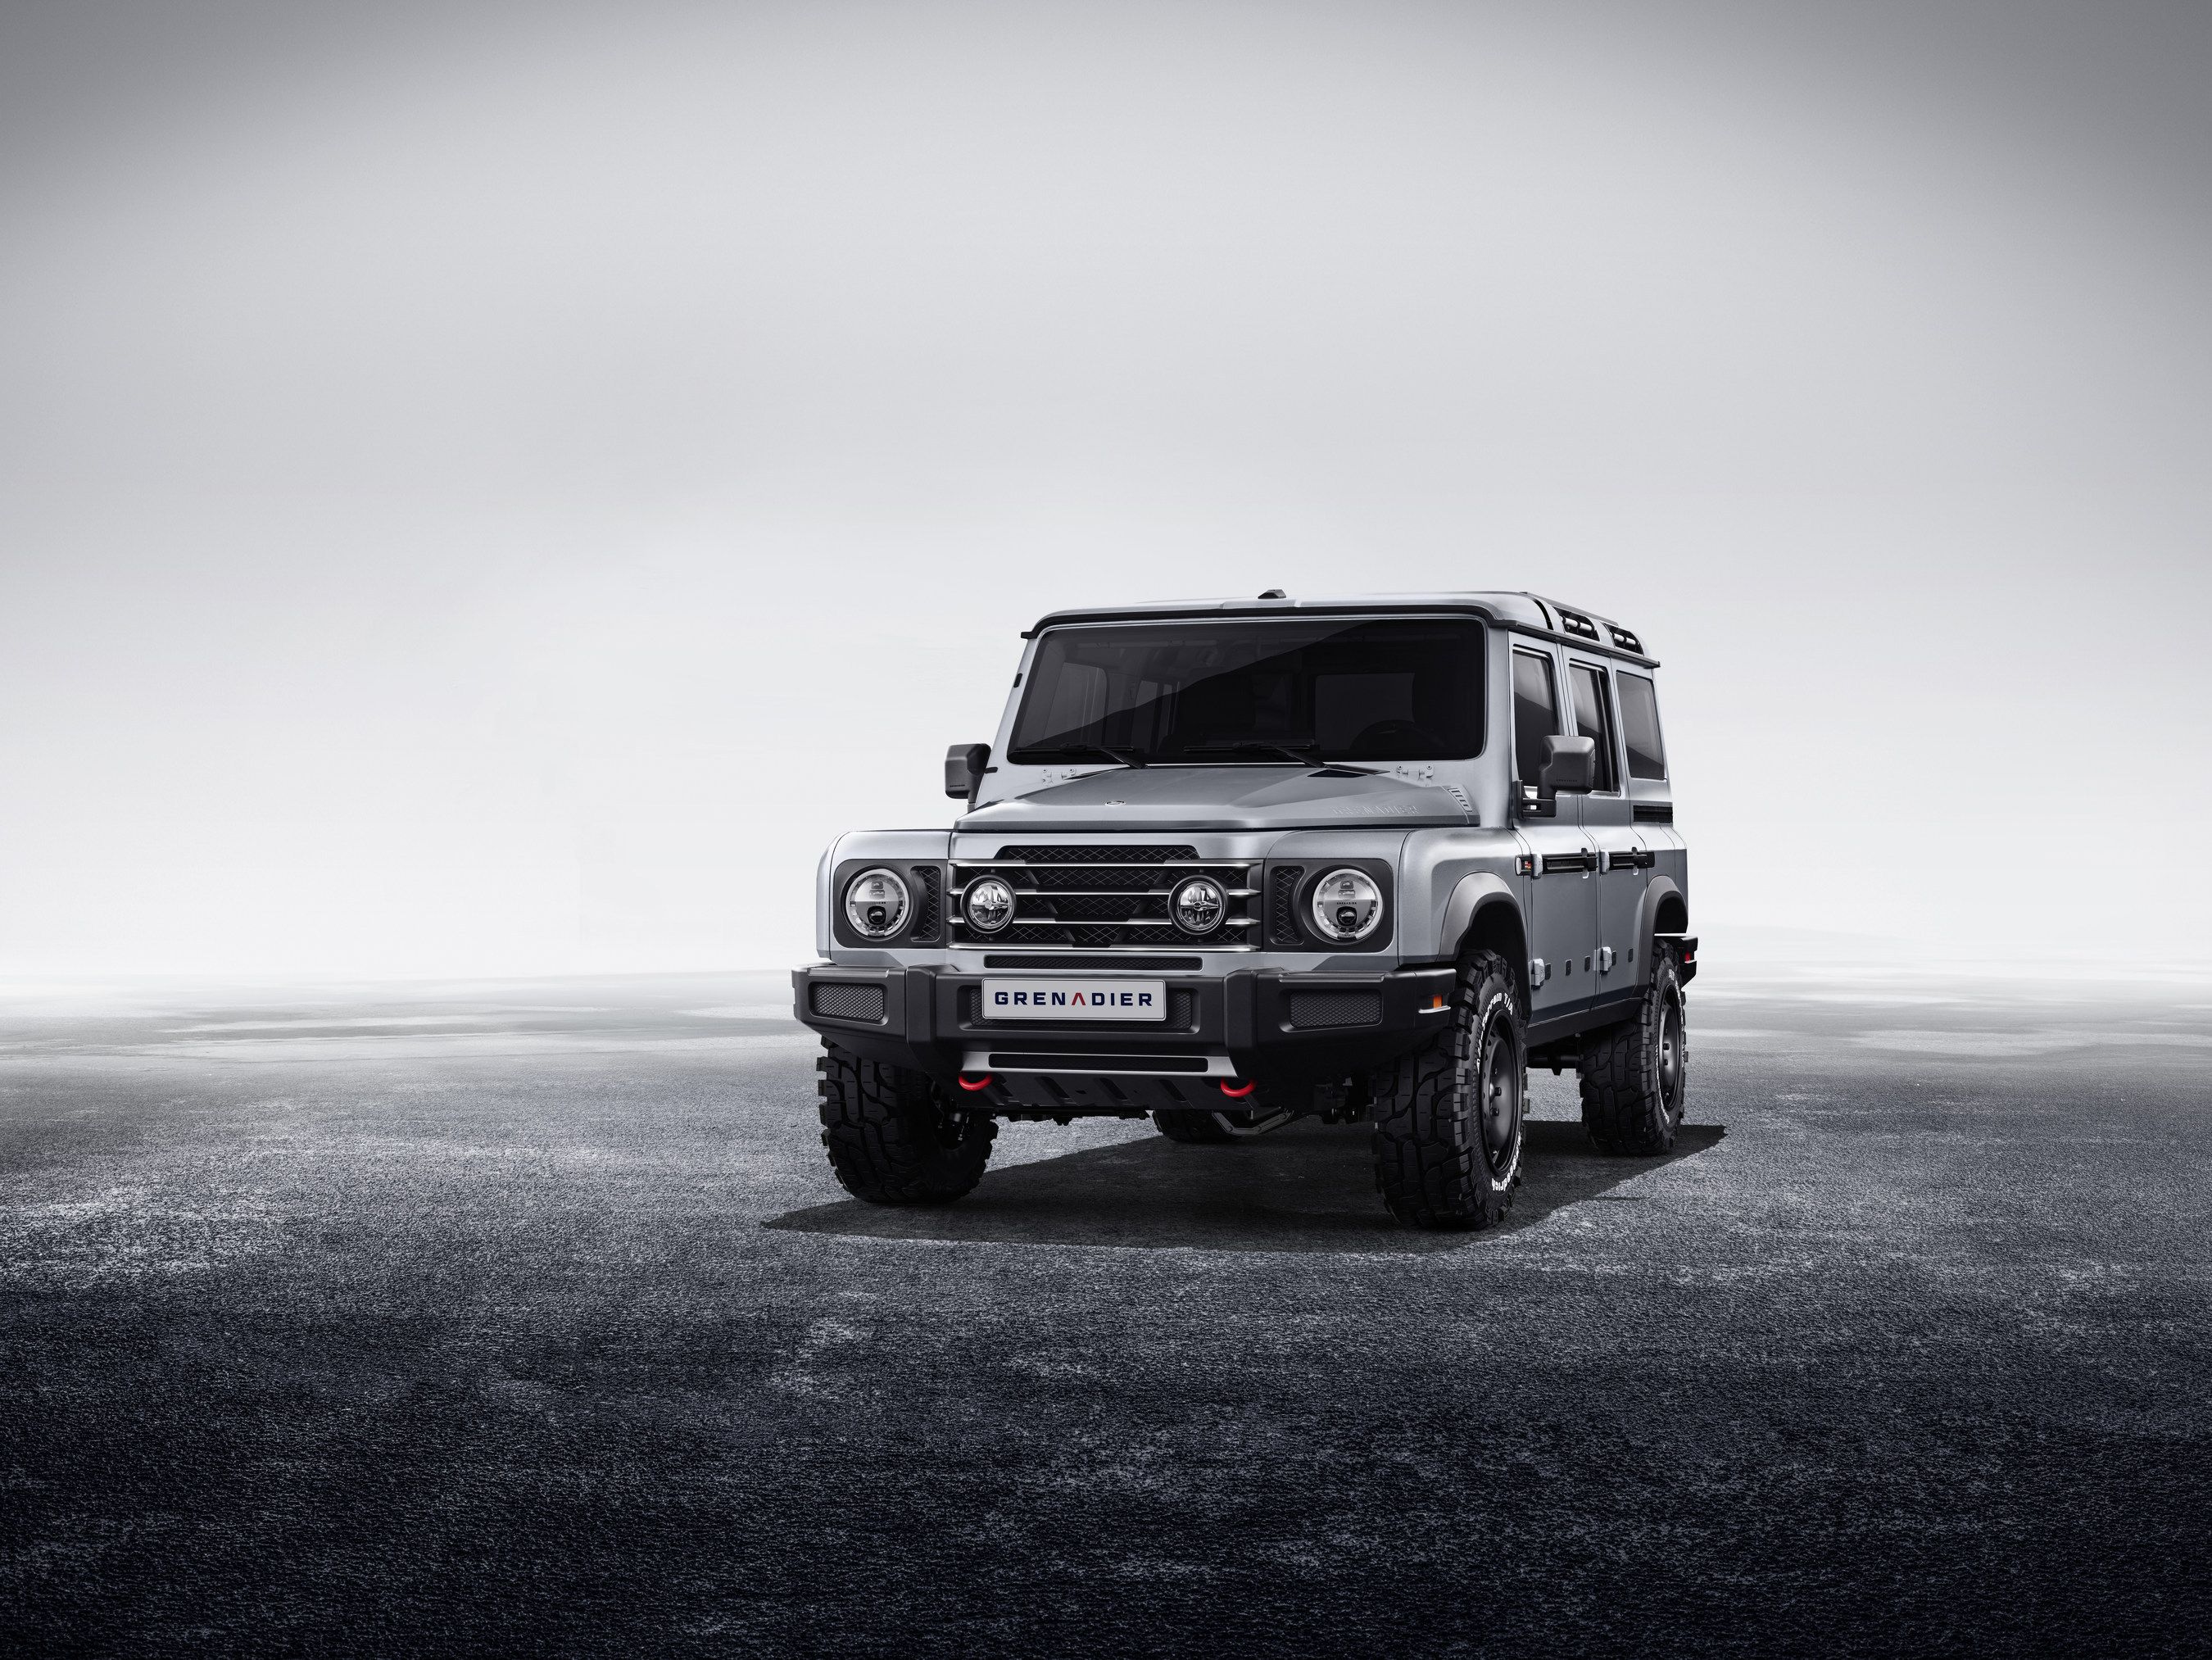 INEOS Grenadier Looks a Lot Like the Old Land Rover Defender, and